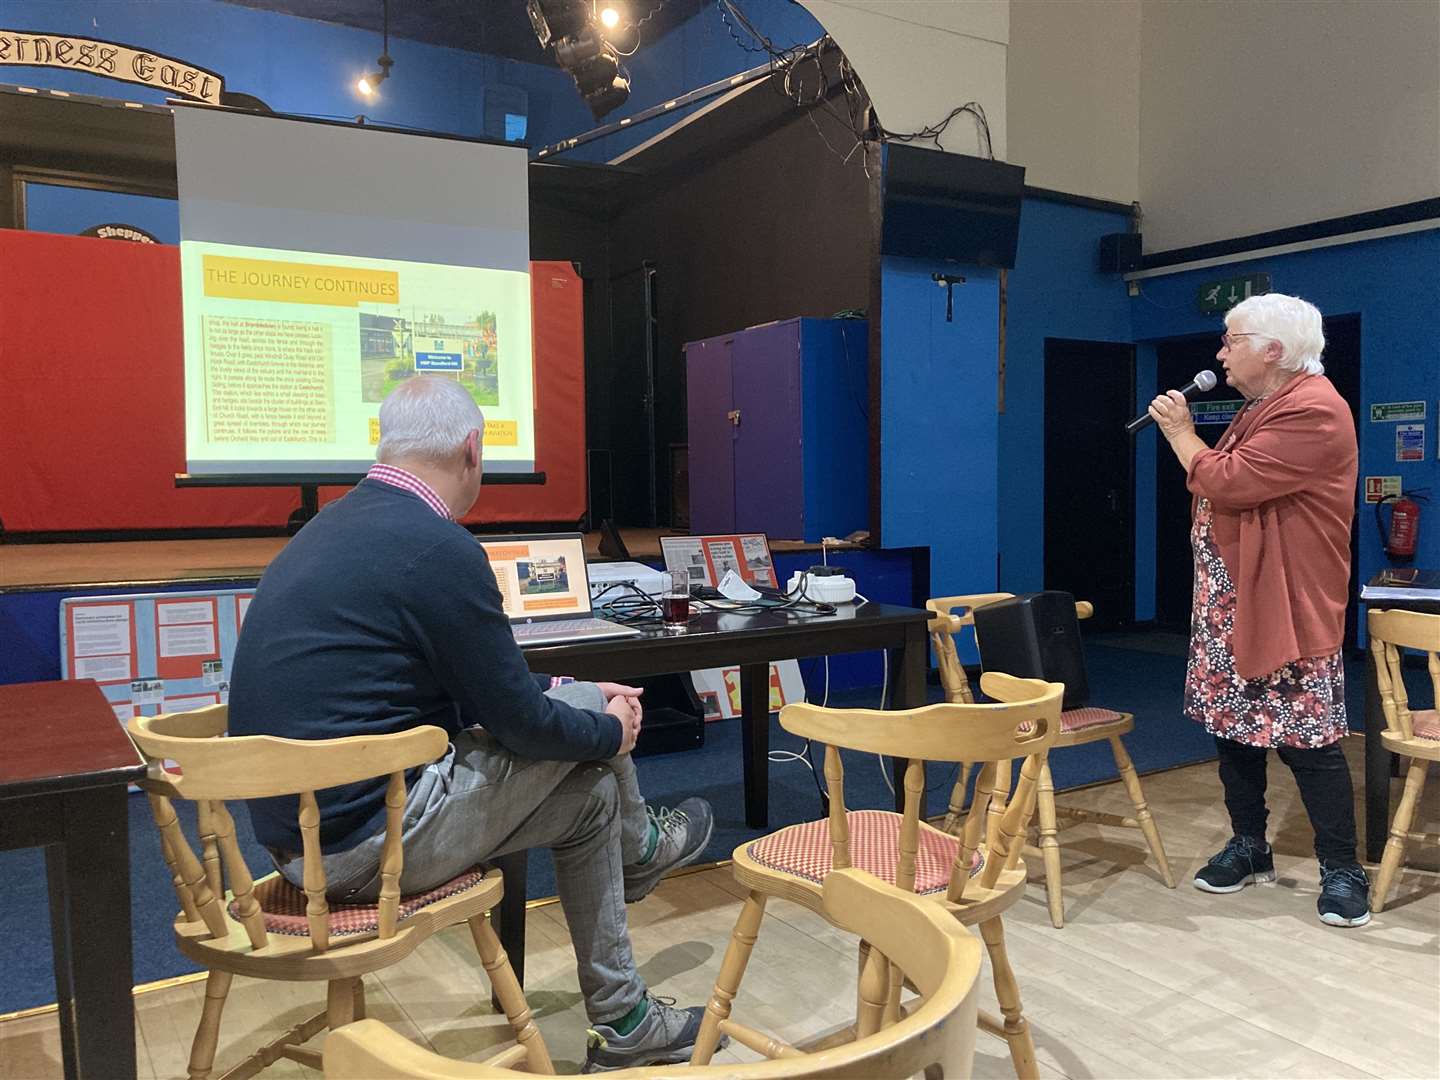 Cllr Linda Brinklow presents her slide show about turning the abandoned Sheppey Light Railway track into a 'greenway' for cycling and walking at Sheerness East WMC, Halfway